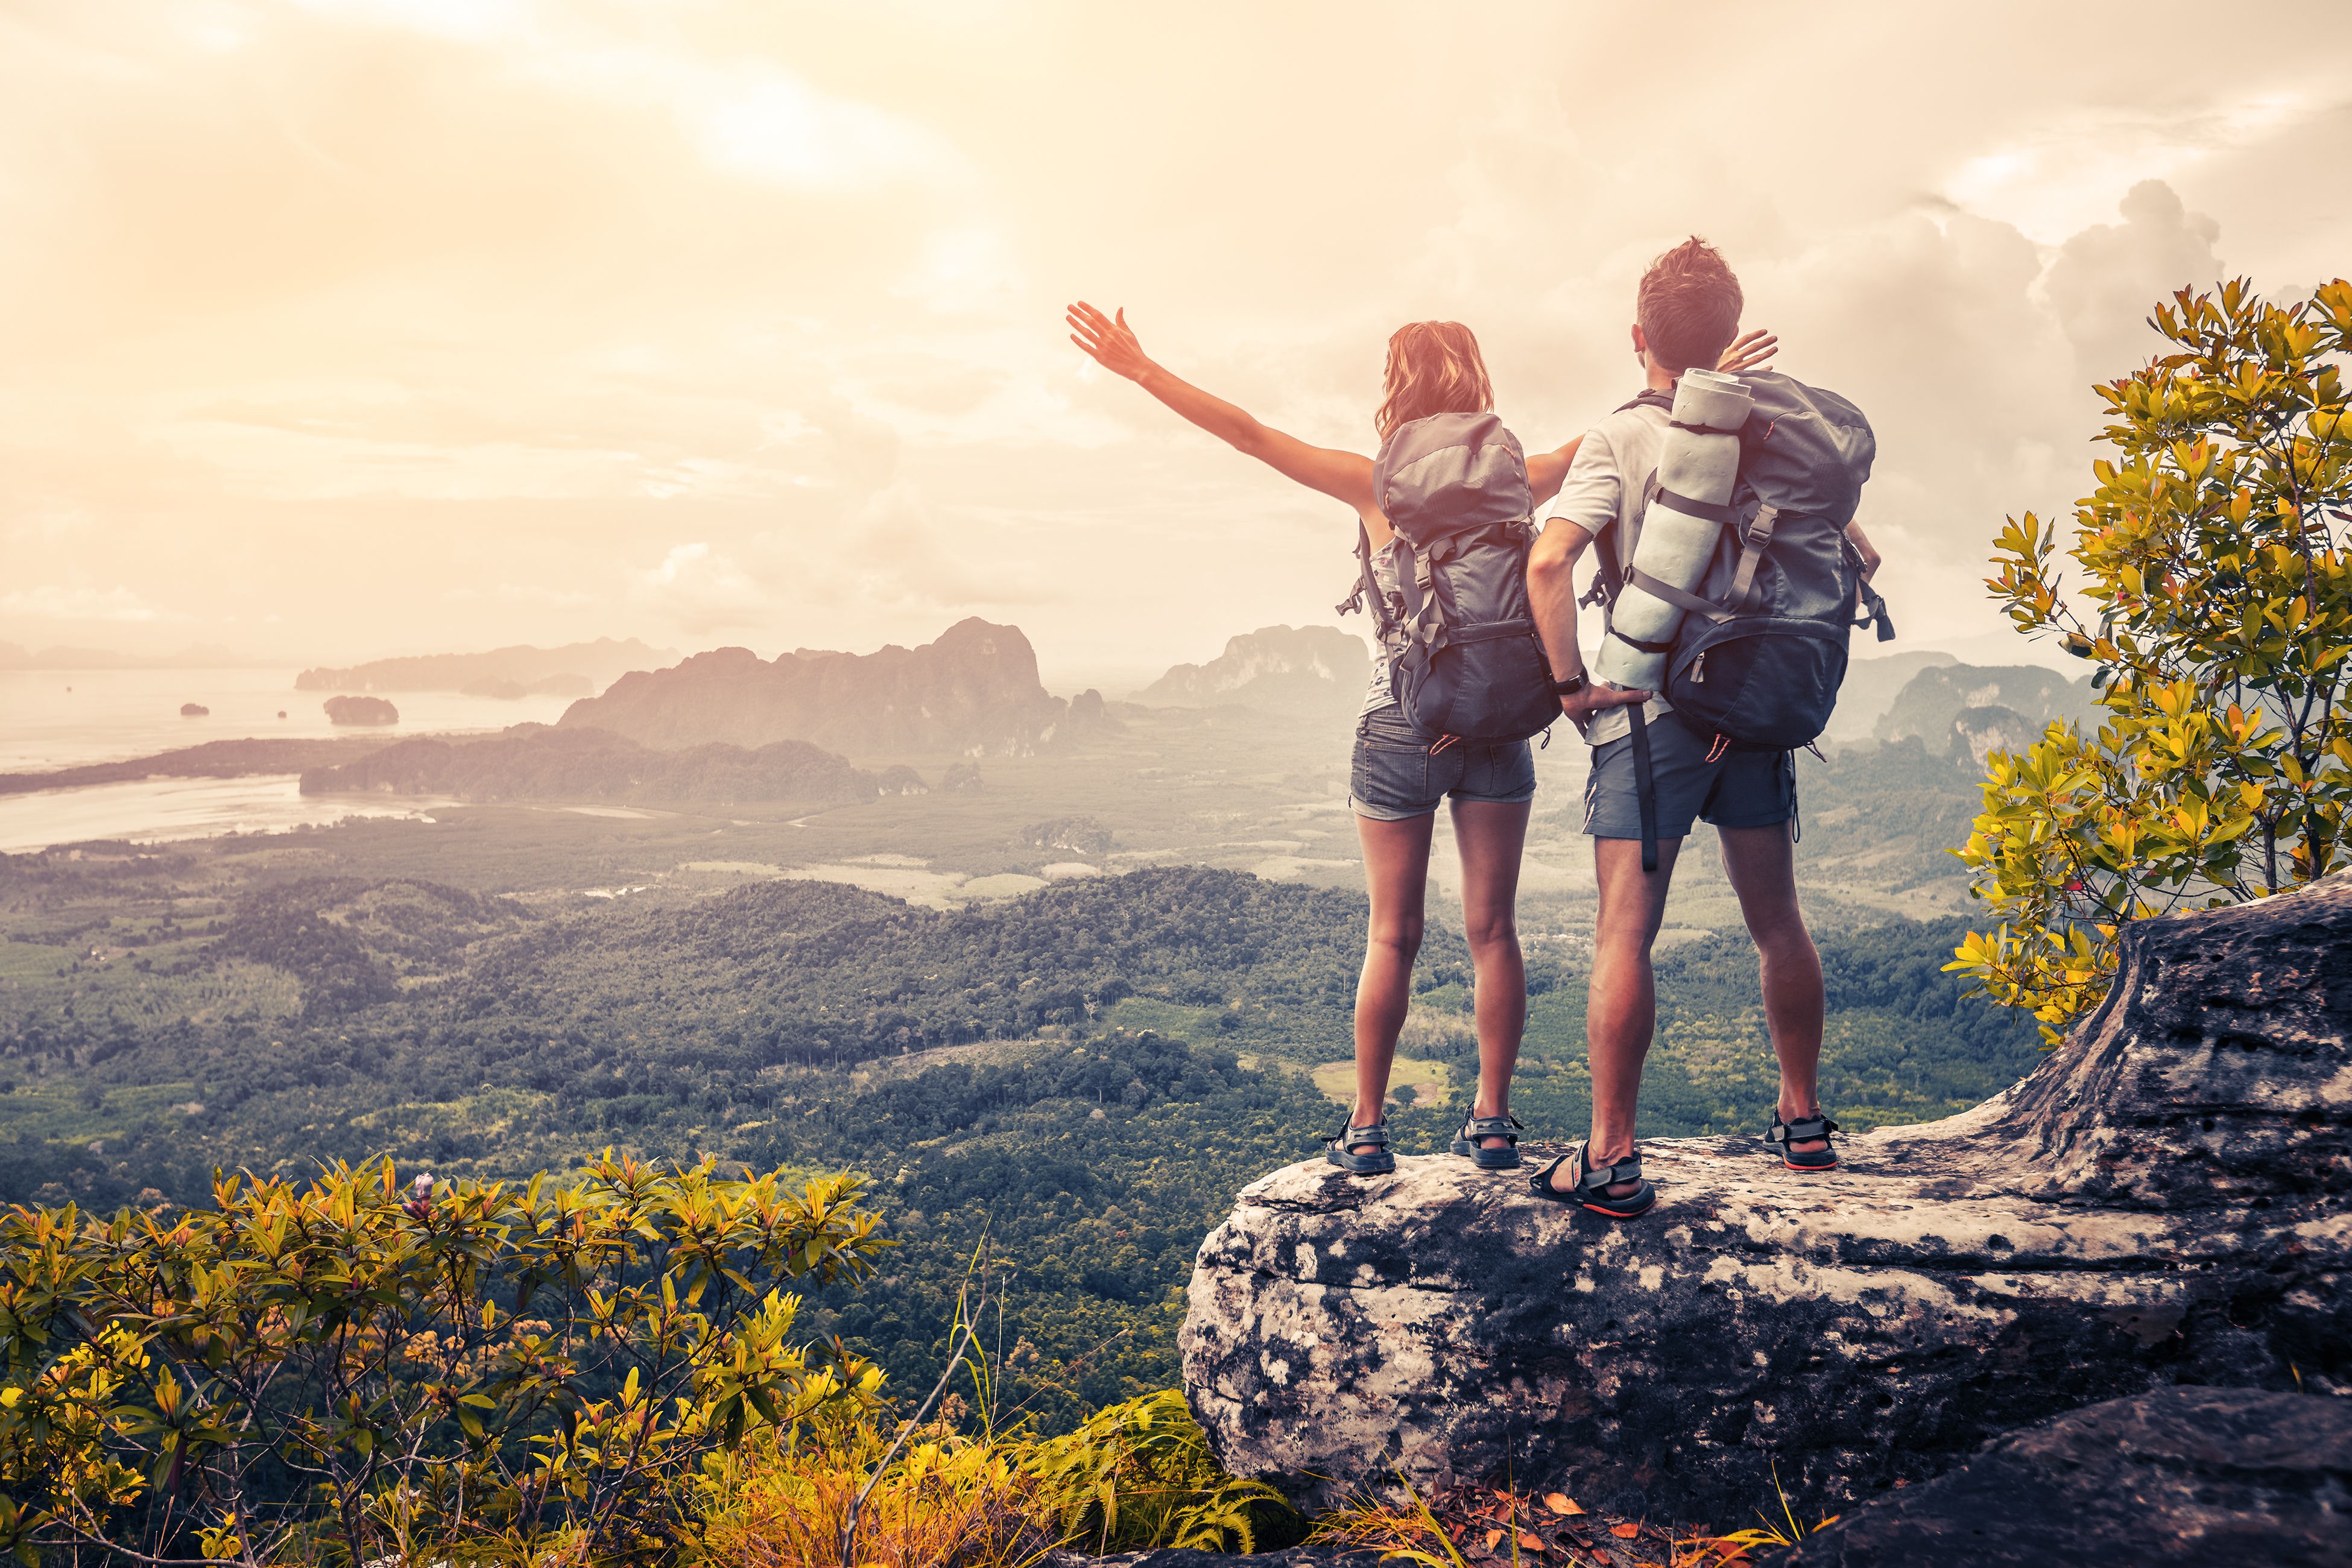 A man and a woman outdoors. | Source: Shutterstock